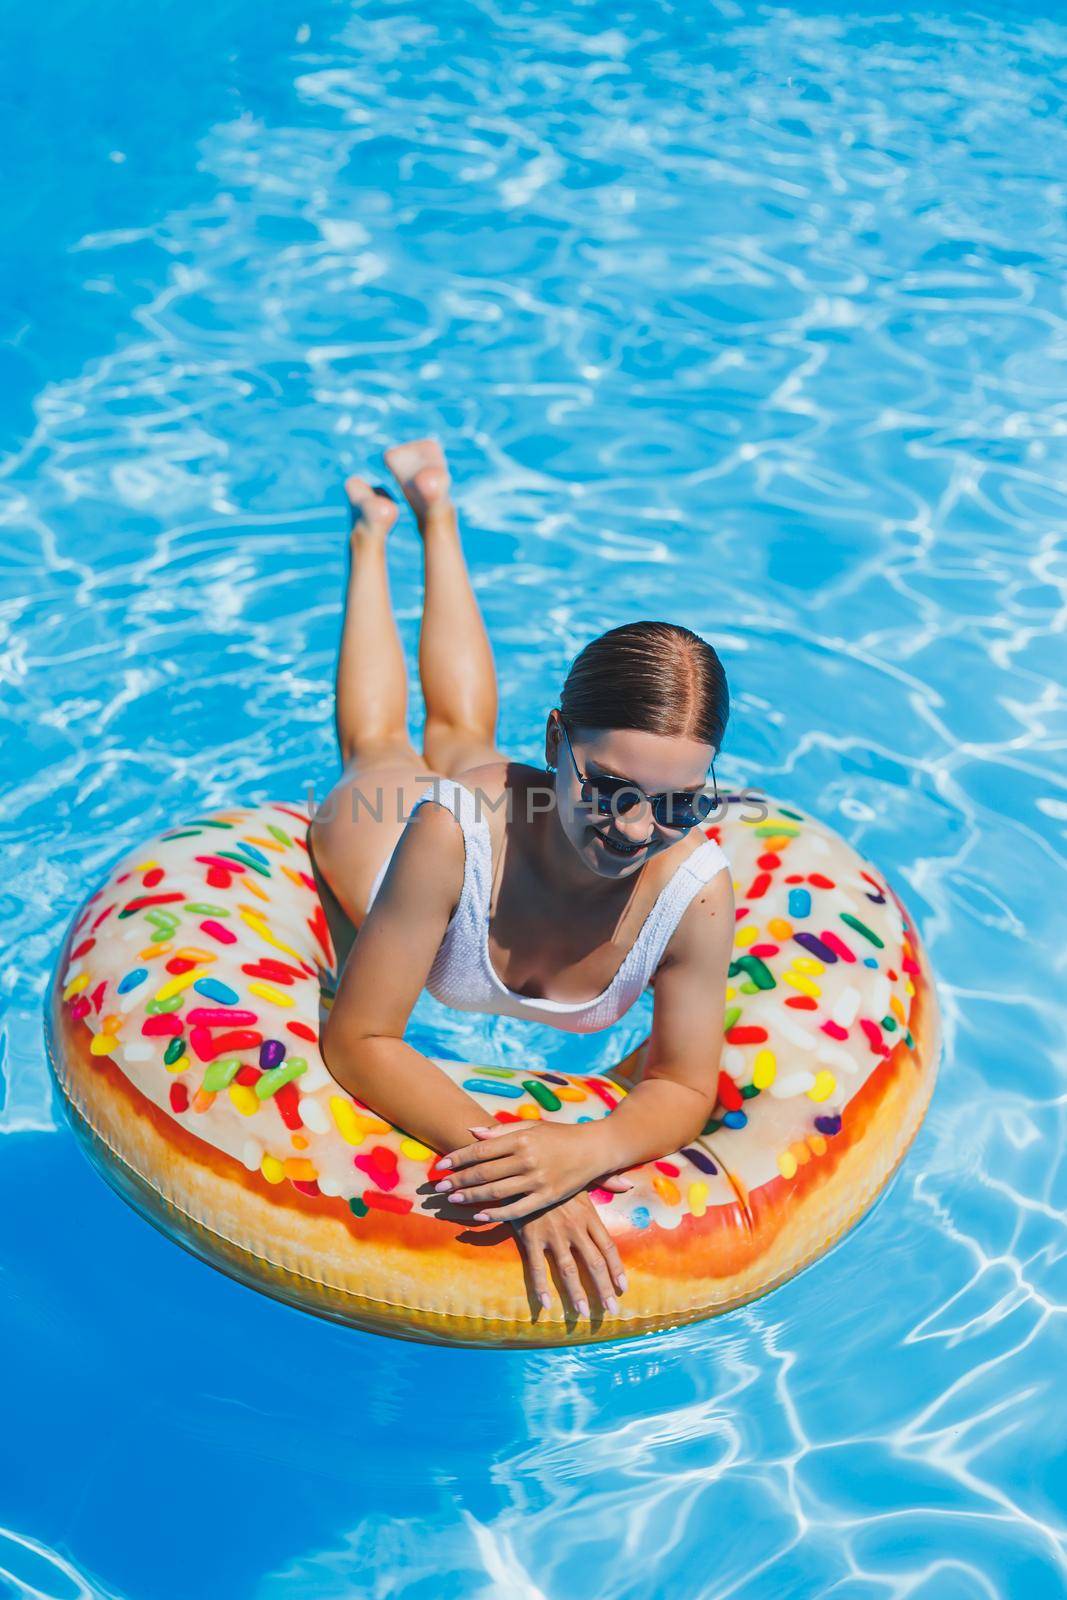 Rest in the pool. Happy young woman in swimsuit, sunglasses and inflatable rubber ring floating in blue water. Summer luxury holidays in the spa resort pool by Dmitrytph